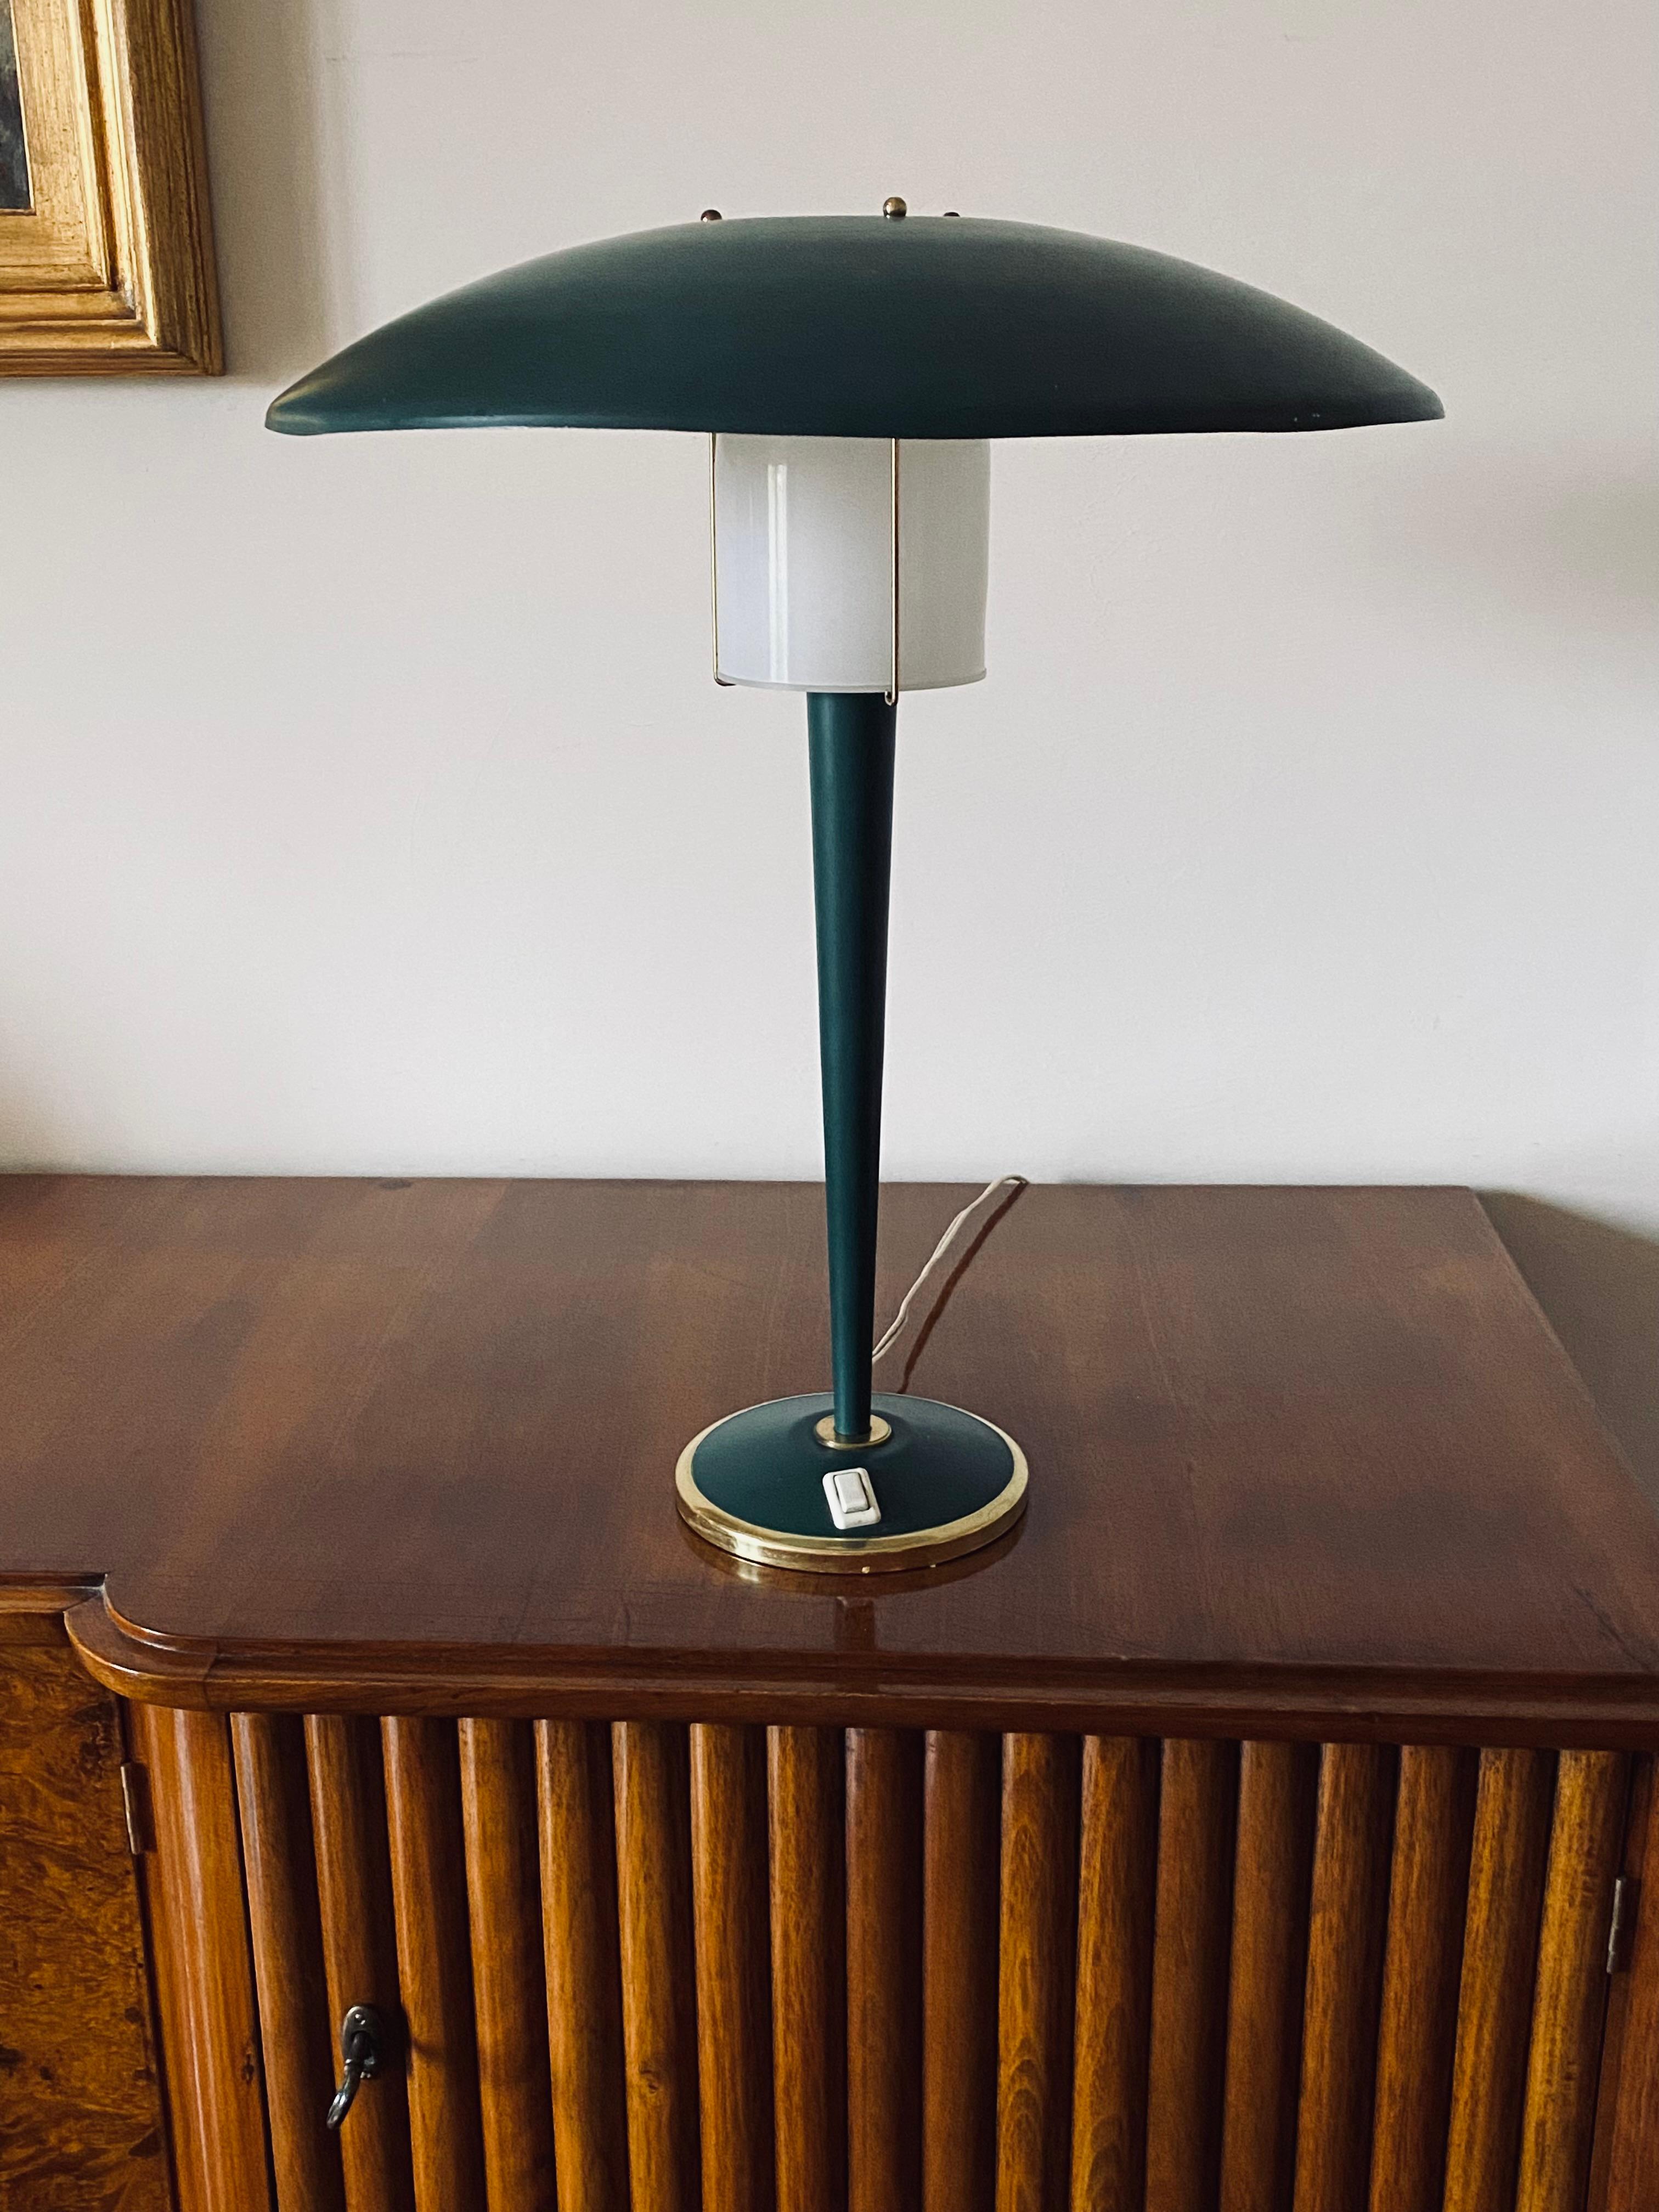 Modernist petrol green table lamp

France 1960s

Brass, metal, lucite

Measures: height 50 x 40 cm diameter

Conditions: excellent consistent with use and age. In working conditions.